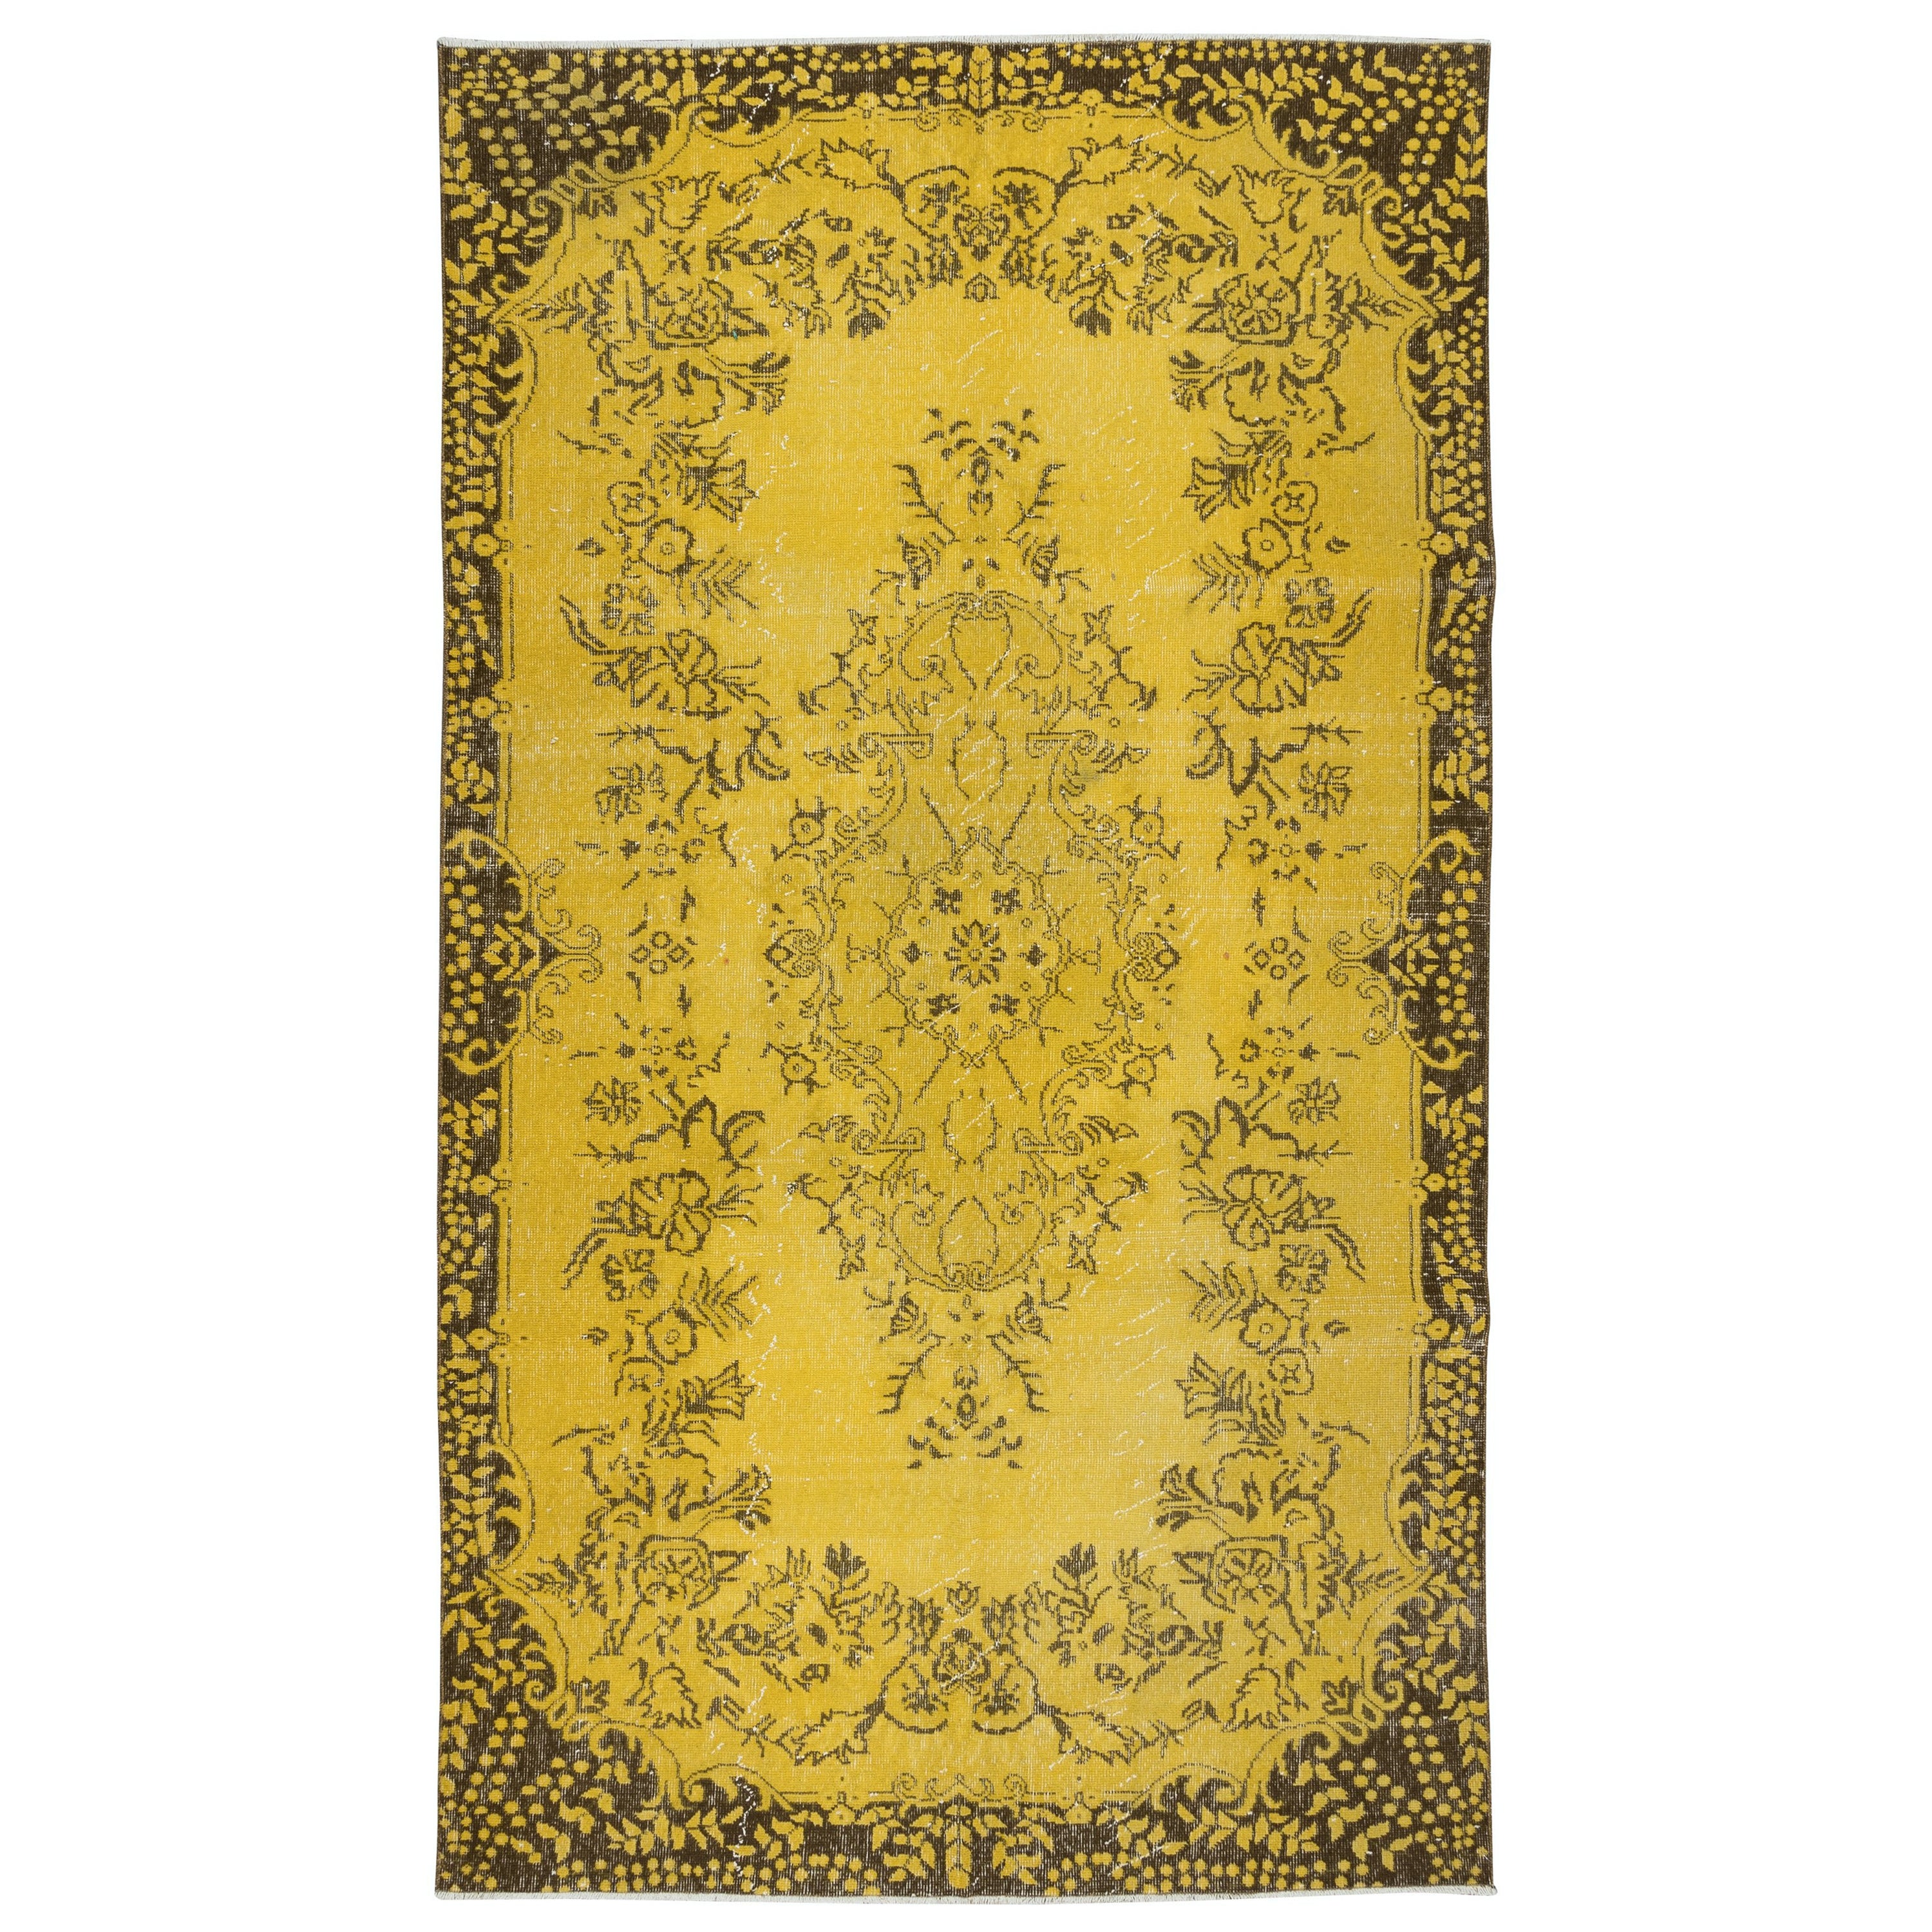 5.5x9.5 Ft Decorative Yellow Handmade Room Size Rug, Upcycled Turkish Carpet For Sale